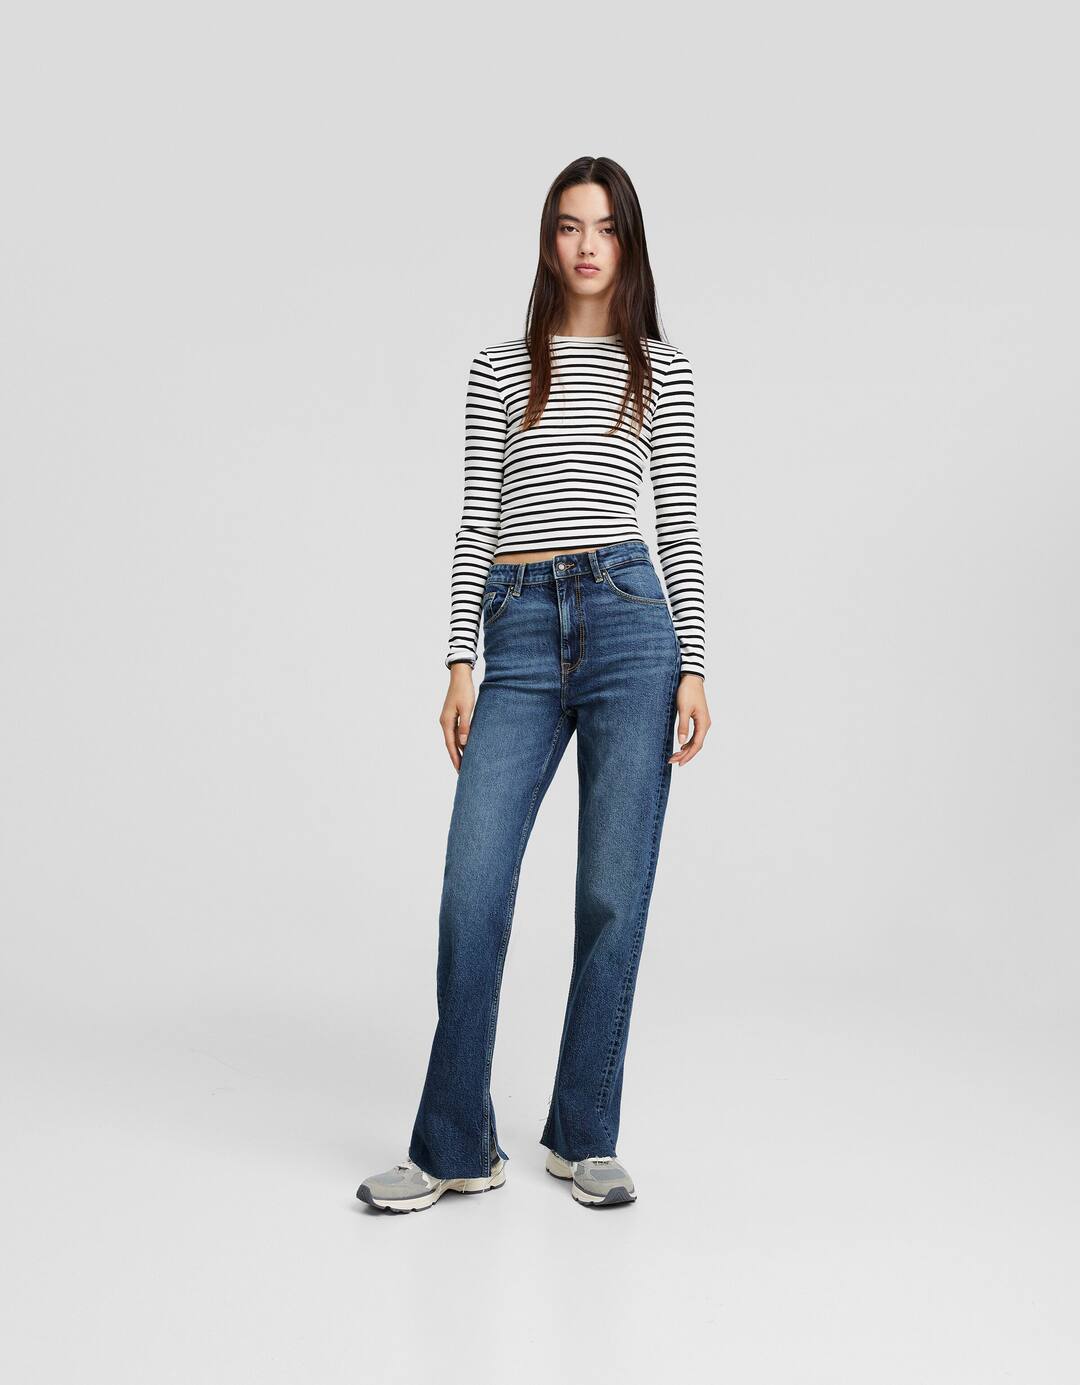 Jeans straight confort abertura lateral